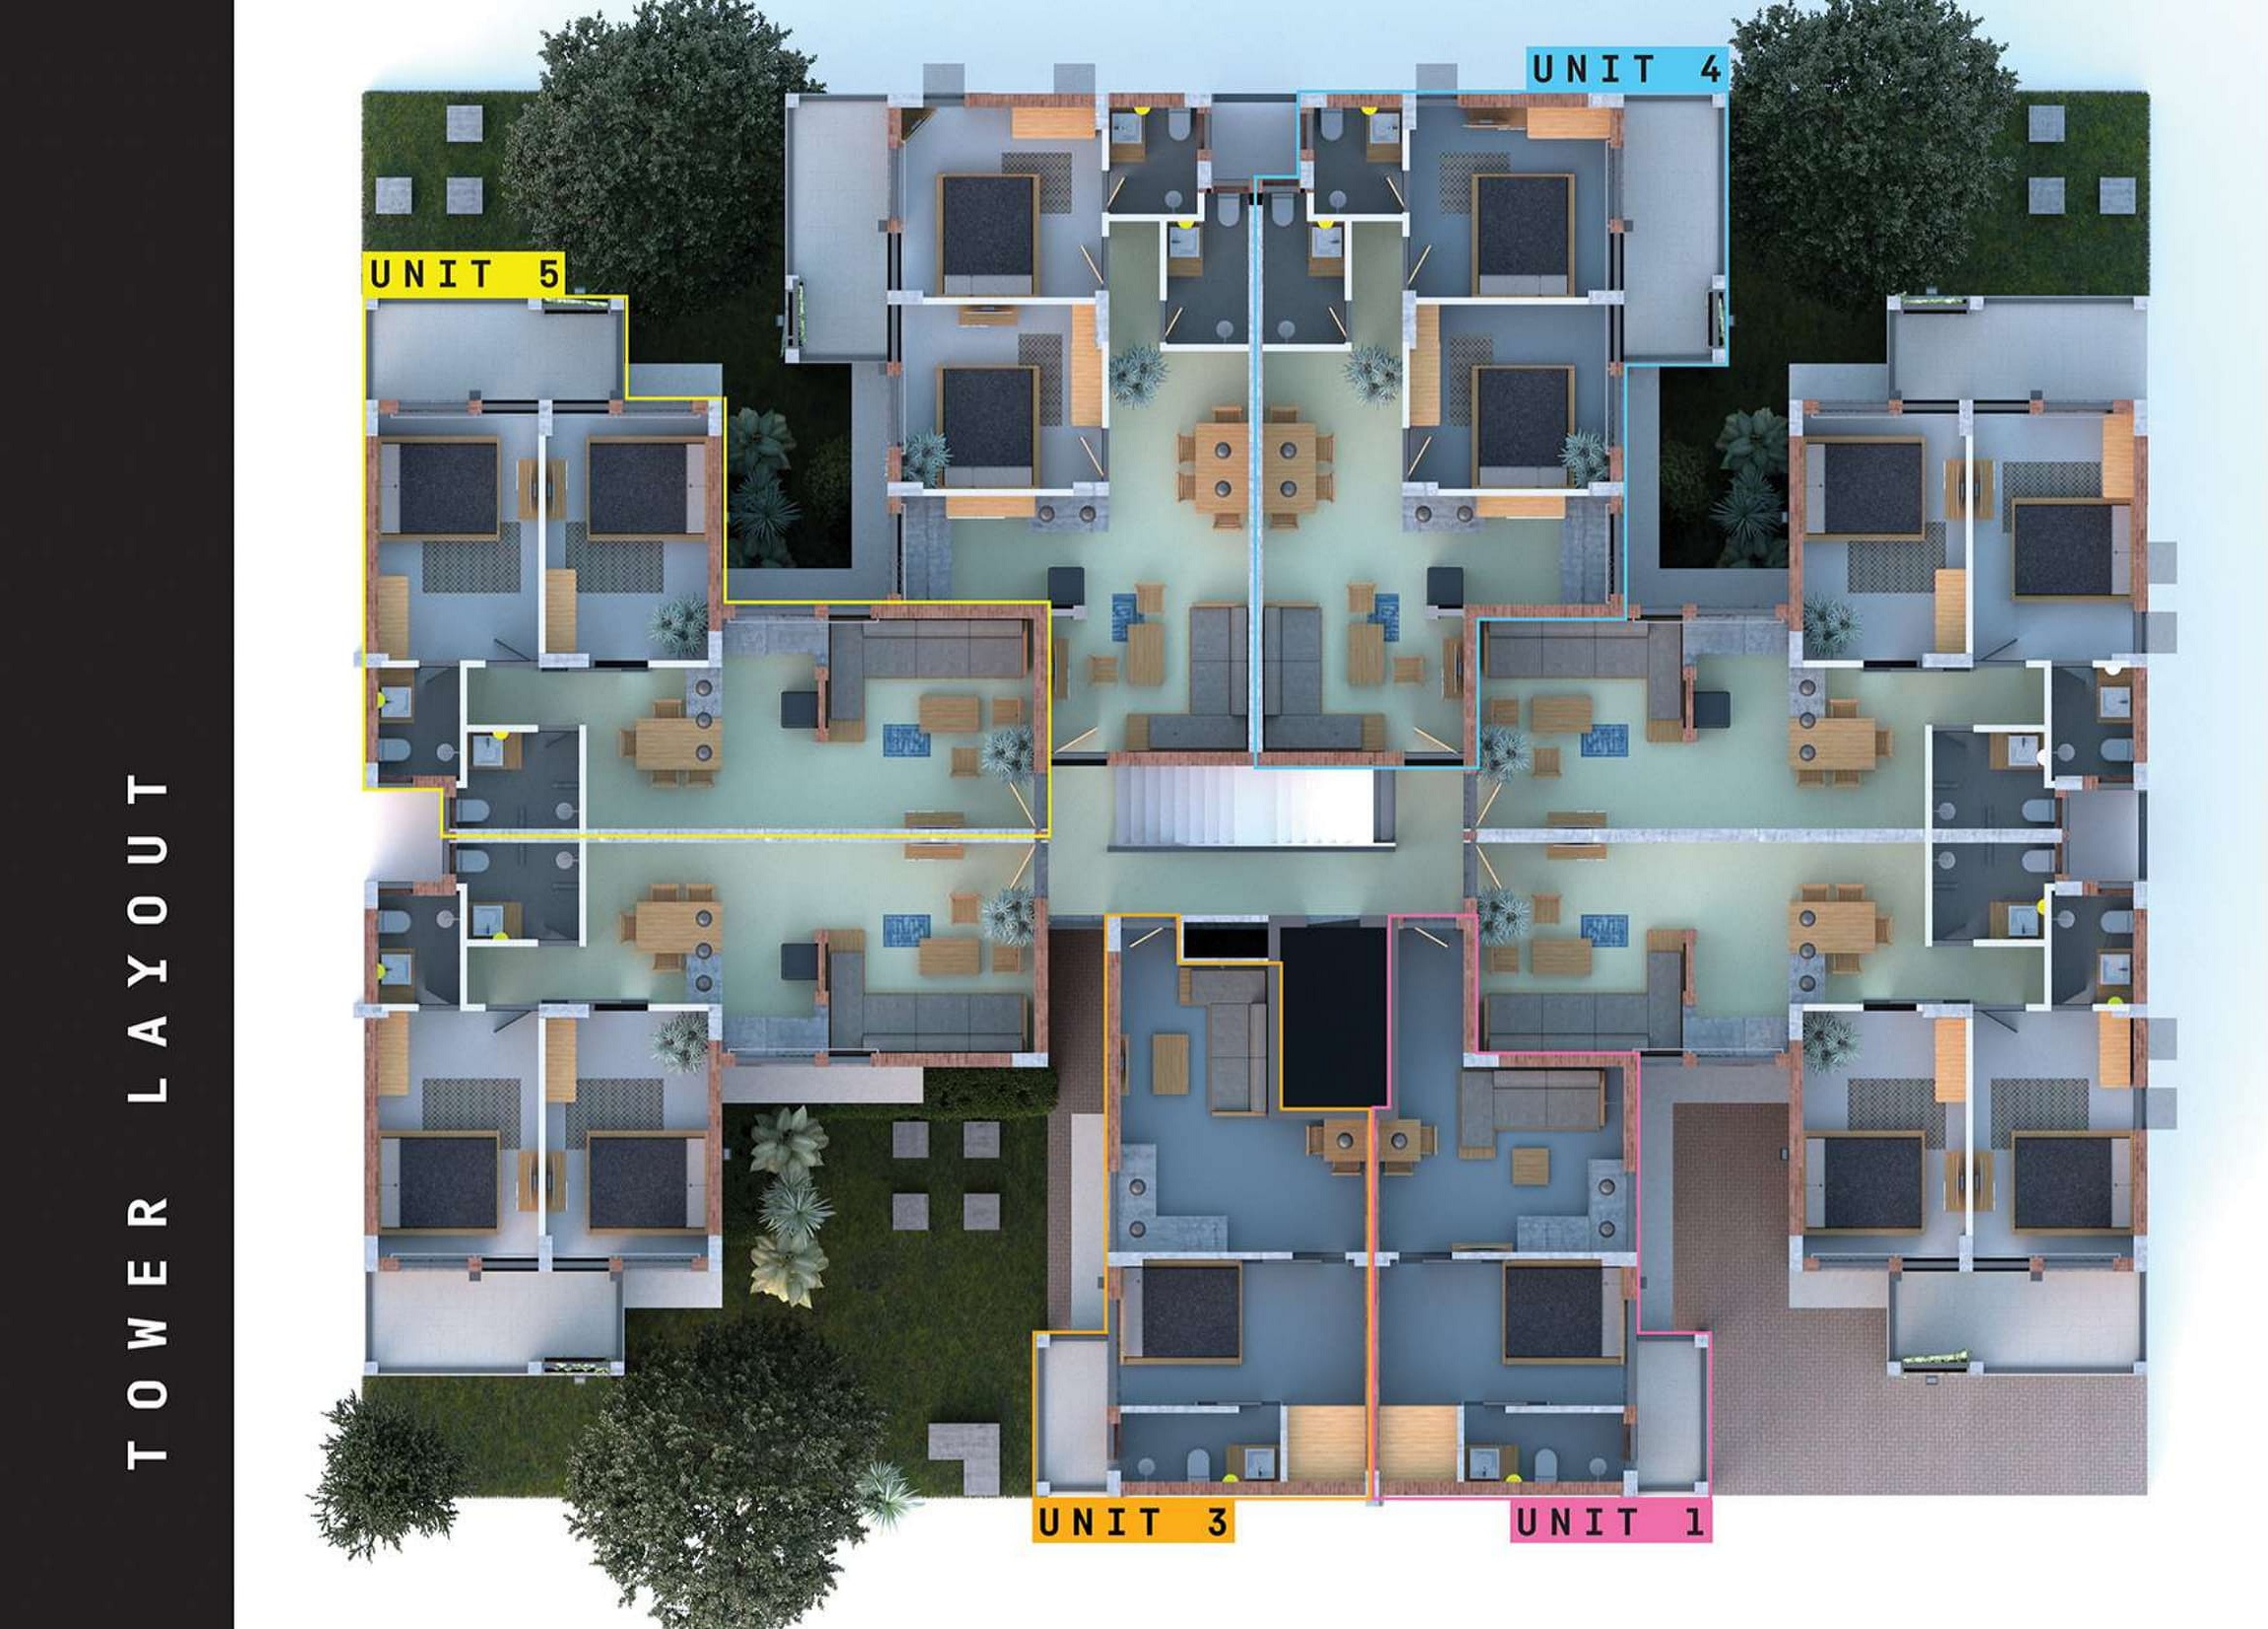 Trisara Our Homes 3 Layout Plan